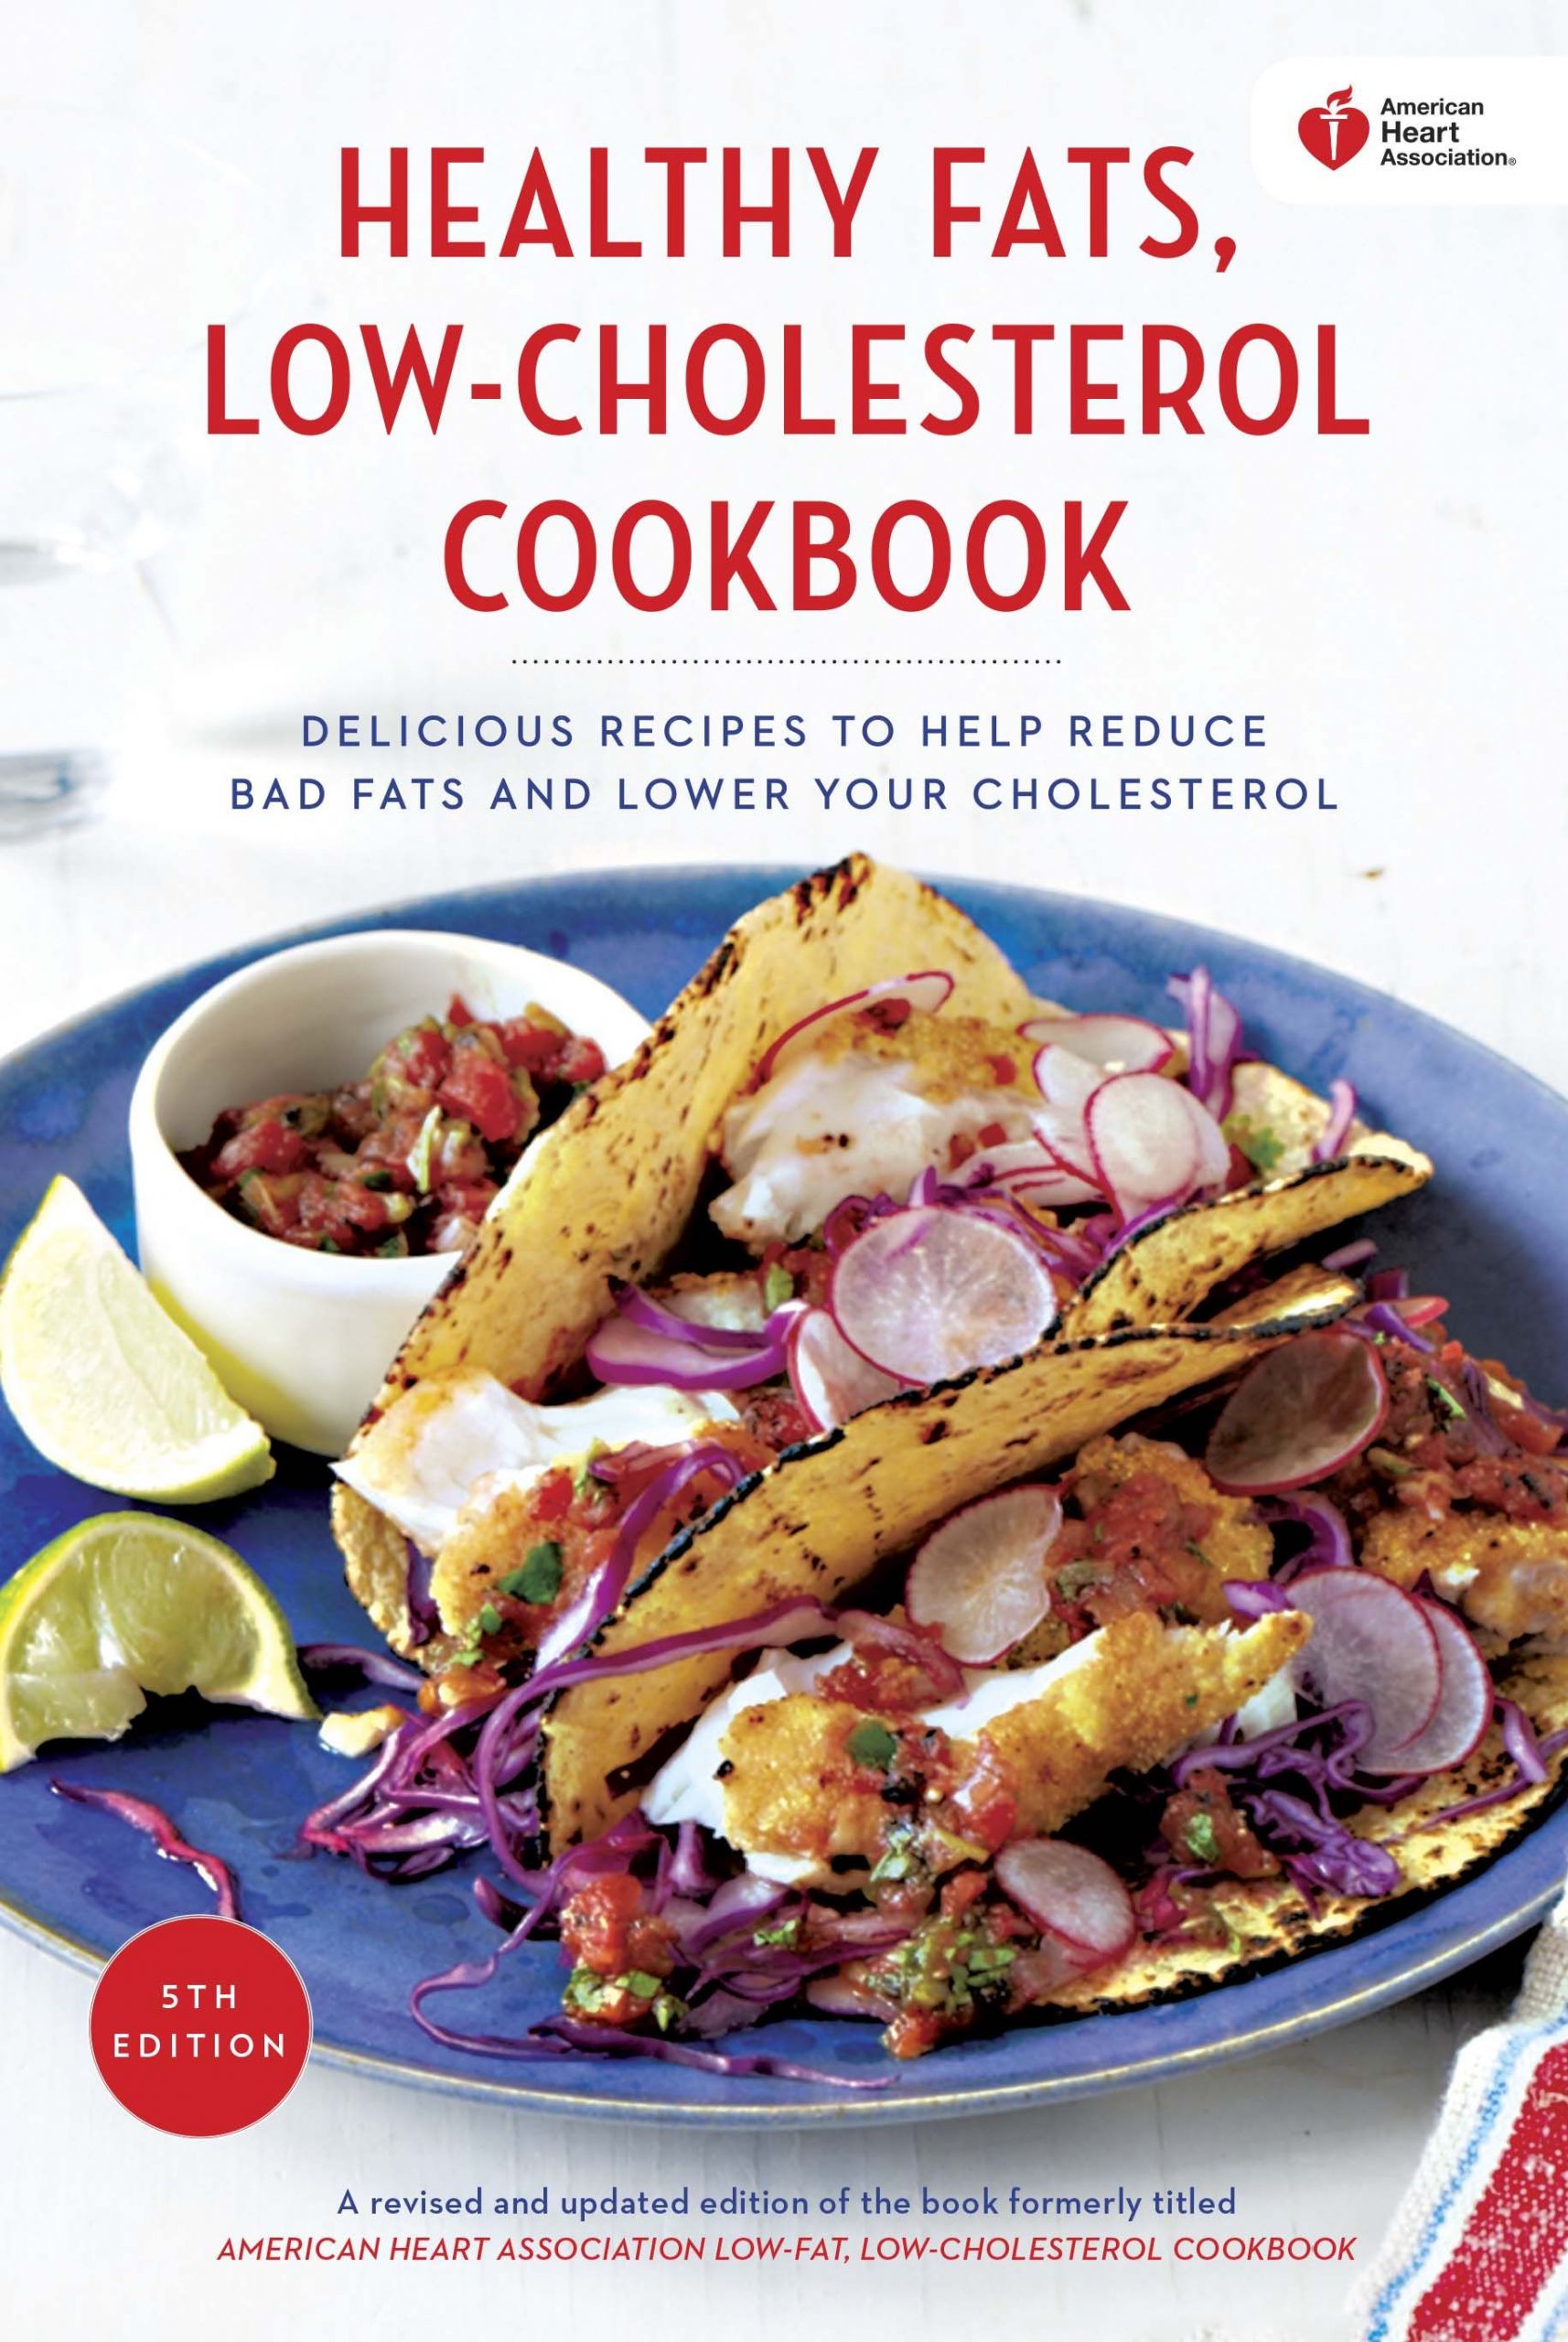 Easy Low Cholesterol Recipes For Dinner
 With over 200 heart healthy recipes our updated cookbook